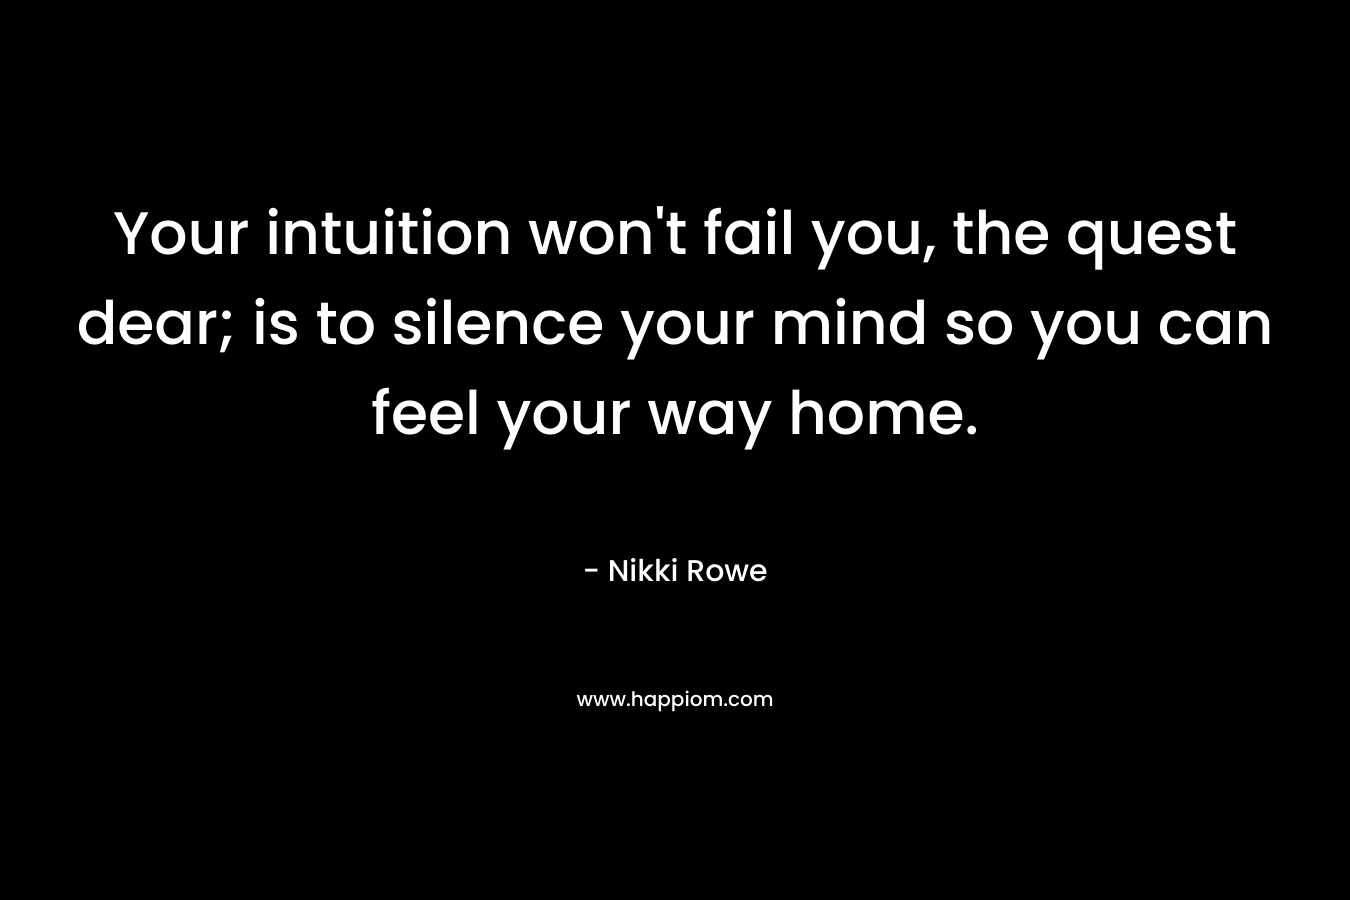 Your intuition won't fail you, the quest dear; is to silence your mind so you can feel your way home.